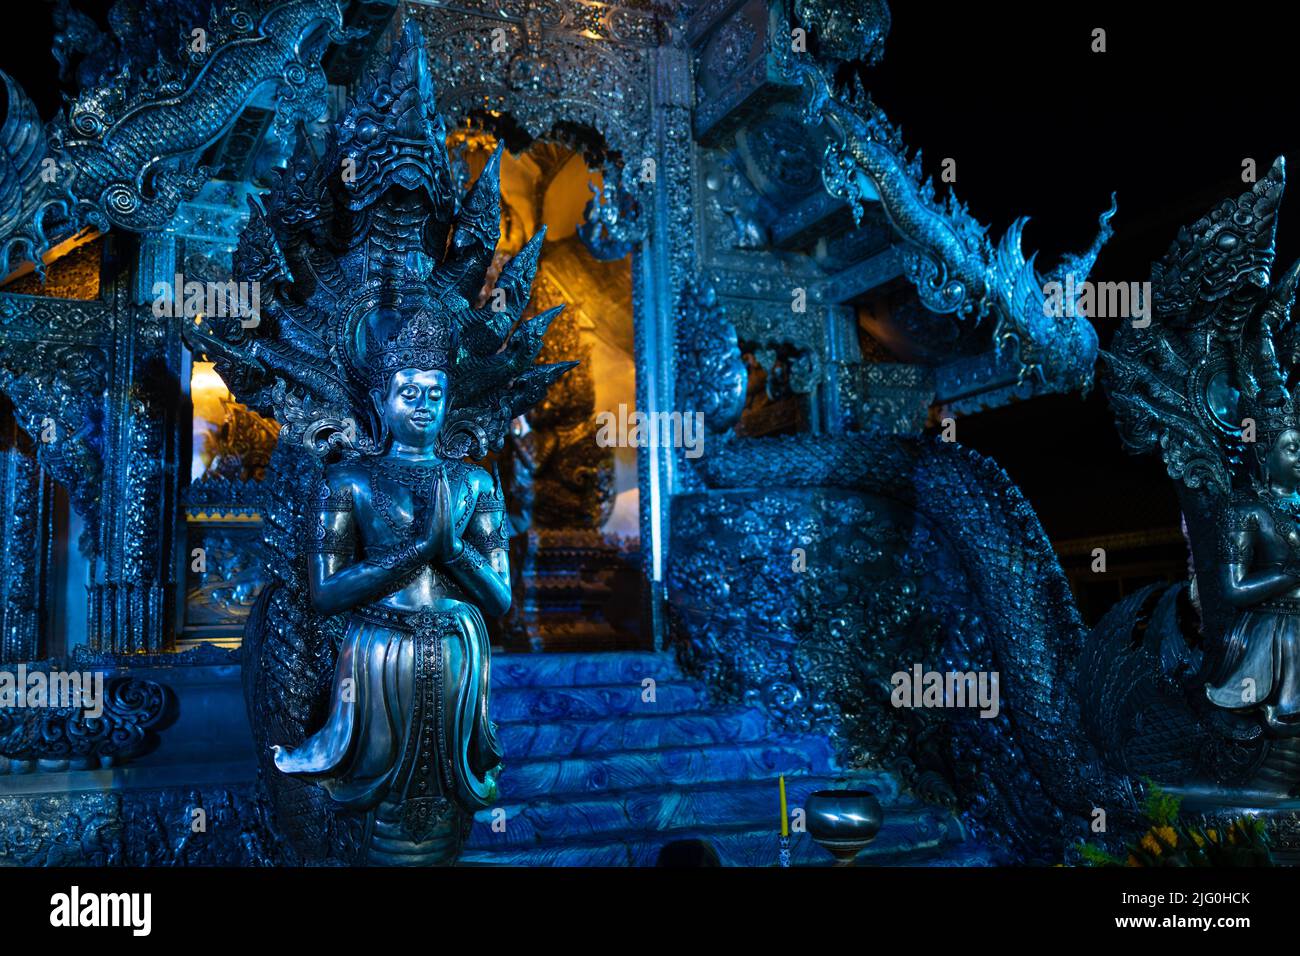 Night shot of the entrance of the Wat Si Suphan silver temple illuminated at night, Chiang Mai, Thailand Stock Photo